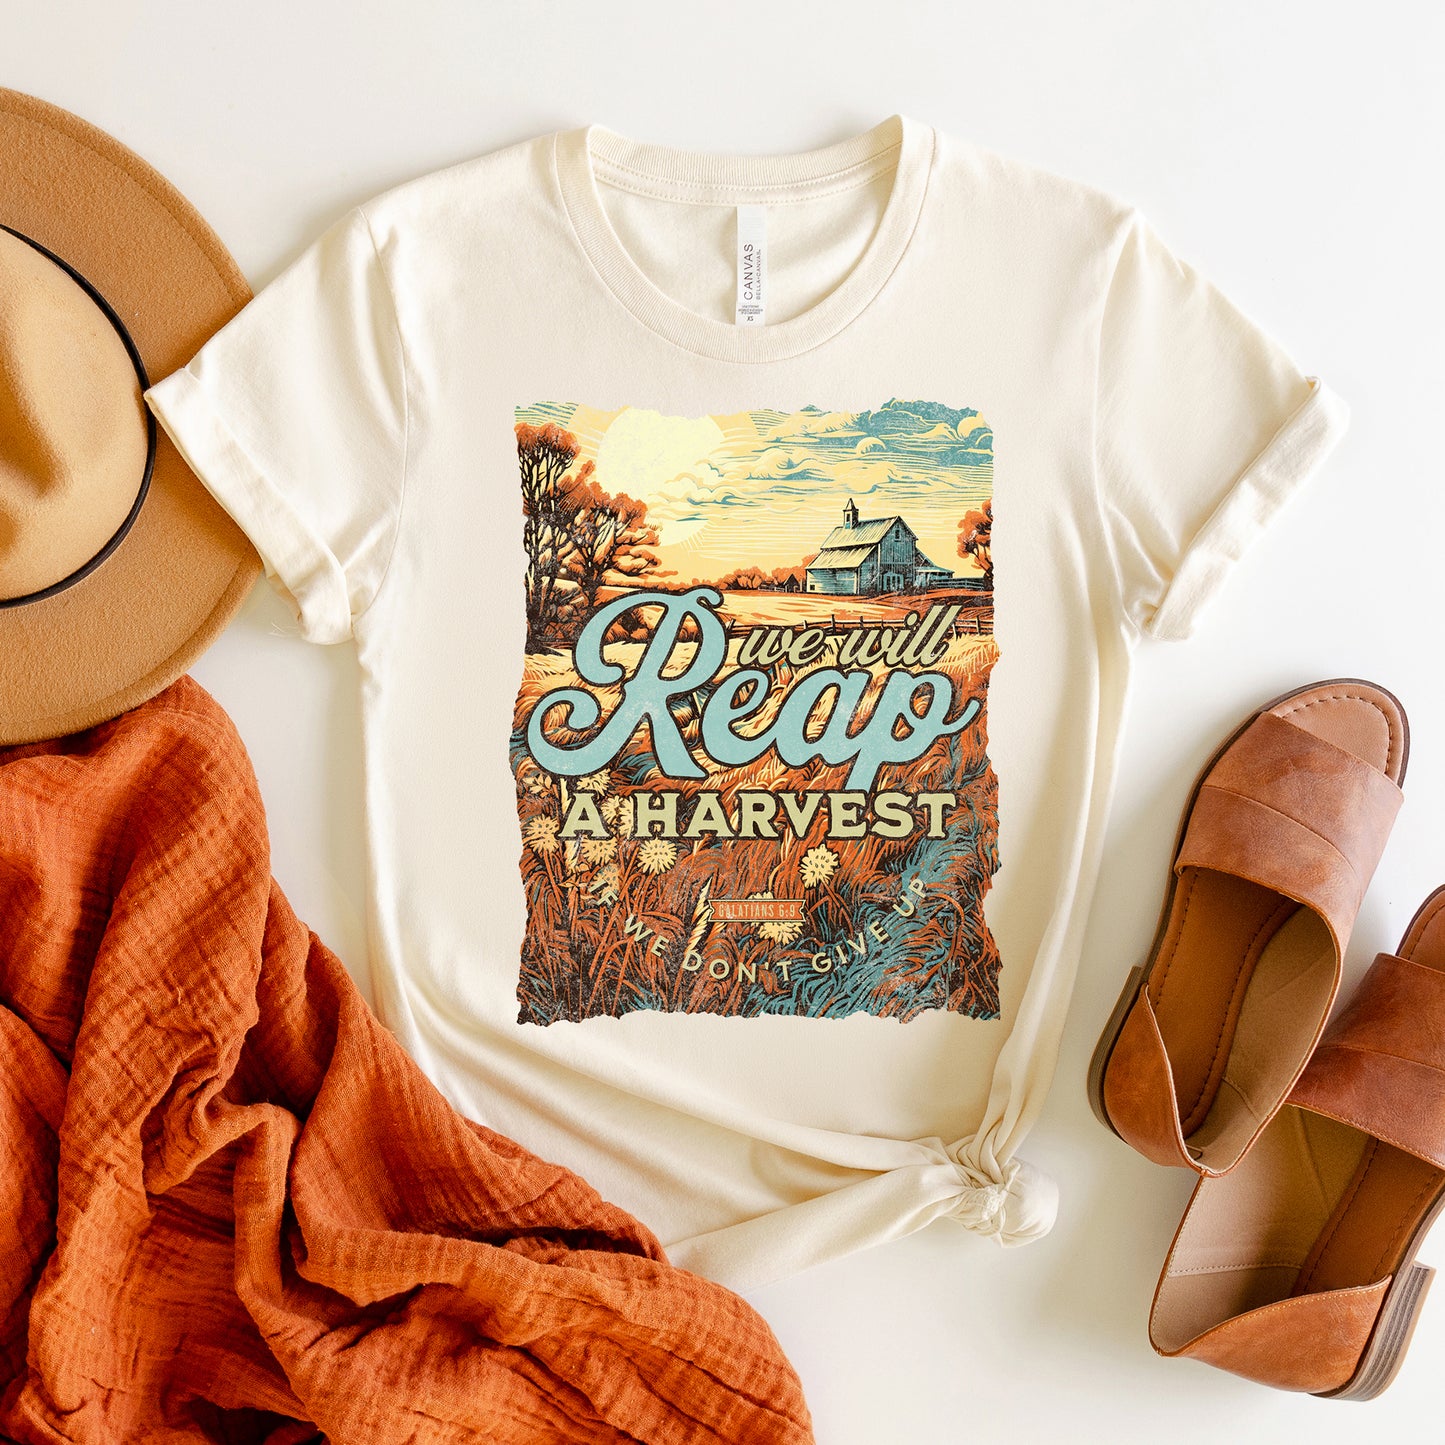 We Will Reap A Harvest | Short Sleeve Crew Neck